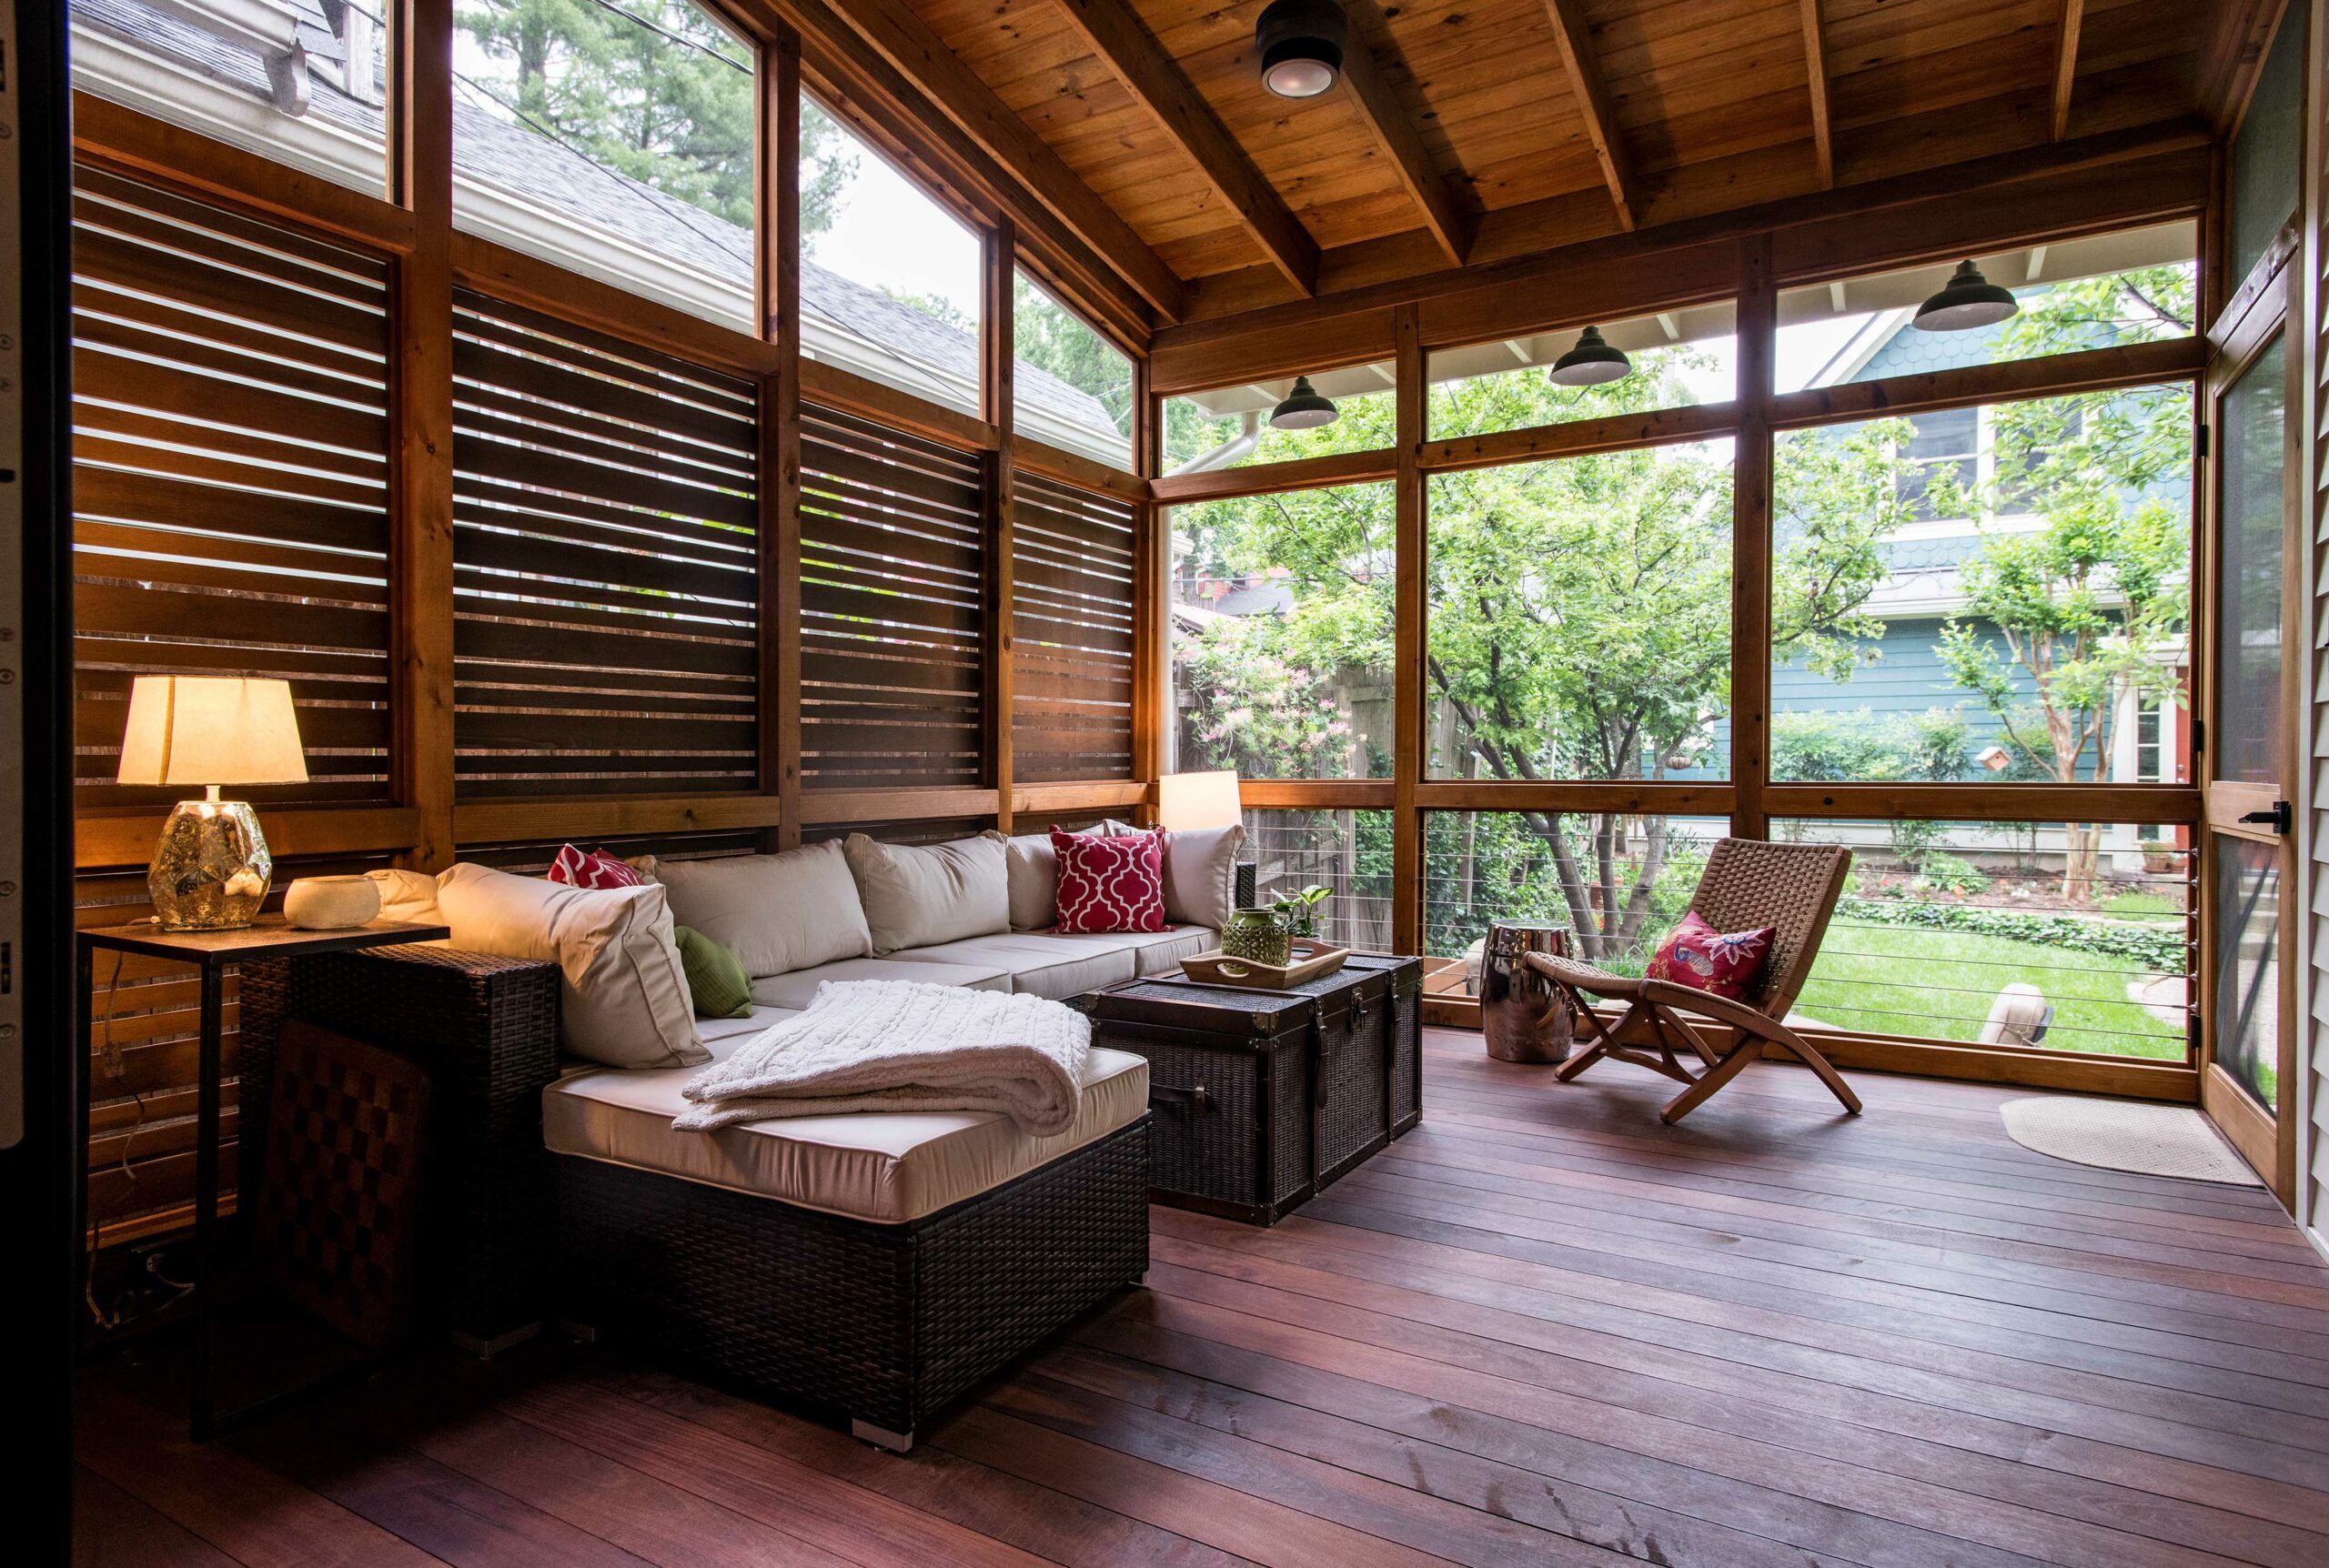 Screened-In Porch Ideas - This Old House